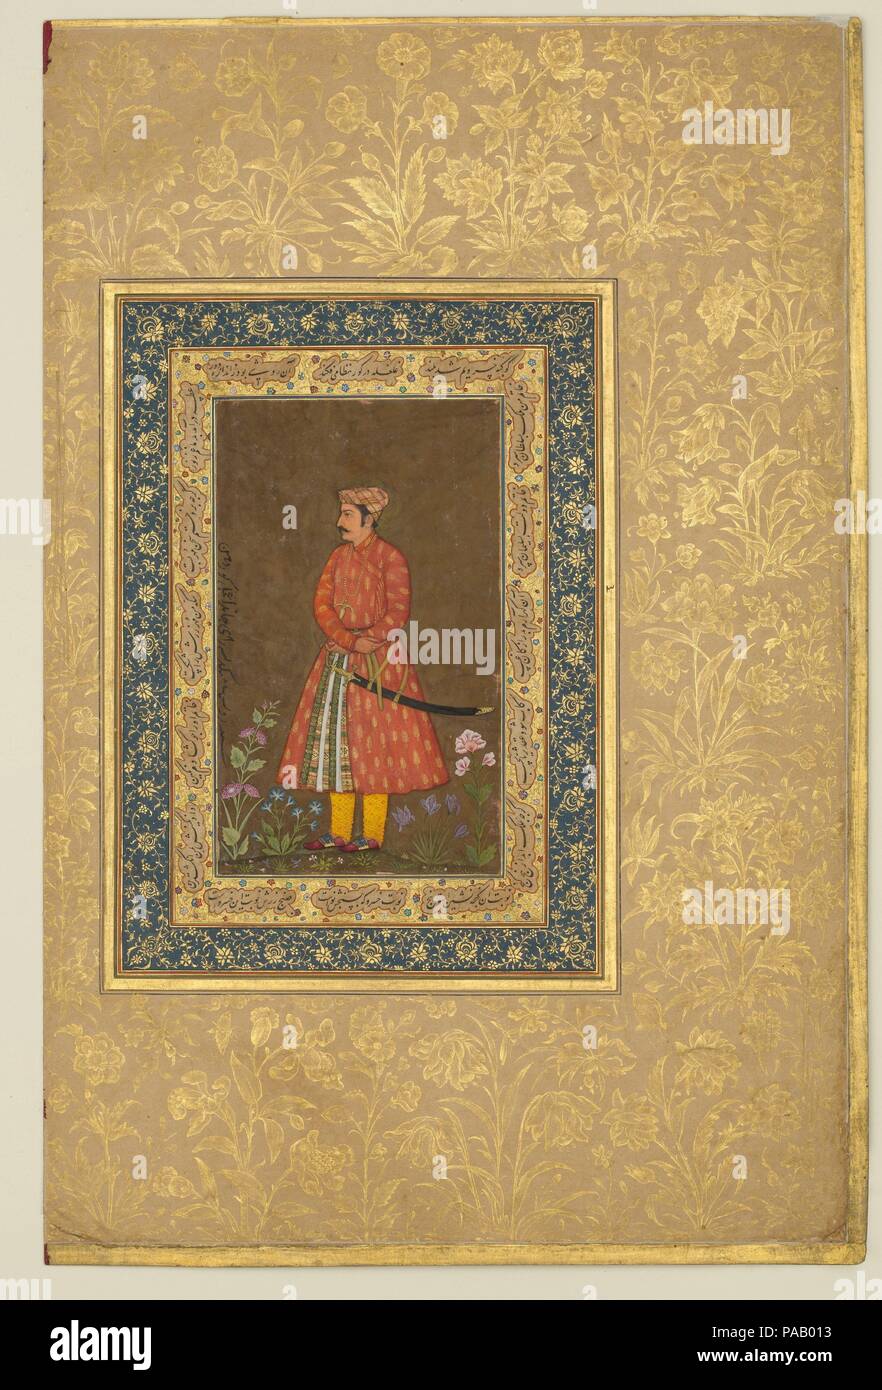 'Portrait of Rup Singh', Folio from the Shah Jahan Album. Artist: Painting by Govardhan (active ca. 1596-1645). Calligrapher: Sultan 'Ali al-Mashhadi (active late 15th-early 16th century). Dimensions: Page: H. 15 5/16 in. (38.9 cm)   W. 10 1/8 in. (25.7 cm)  Painting with border: H. 8 13/16 in. (22.4 cm)  W. 6 5/16 in. (16 cm)  Painting without border: H. 5 7/8 in. (14.9 cm)  W. 3 1/2 in. (8.9 cm)  Mat: H. 19 1/4 in. (48.9 cm)   W. 14 1/4 in. (36.2 cm). Date: verso: ca. 1615-20; recto: ca. 1500.  The subject of this painting, Rup Singh, son of Ram Chand (not Rai Chanda, as per Jahangir's inscr Stock Photo